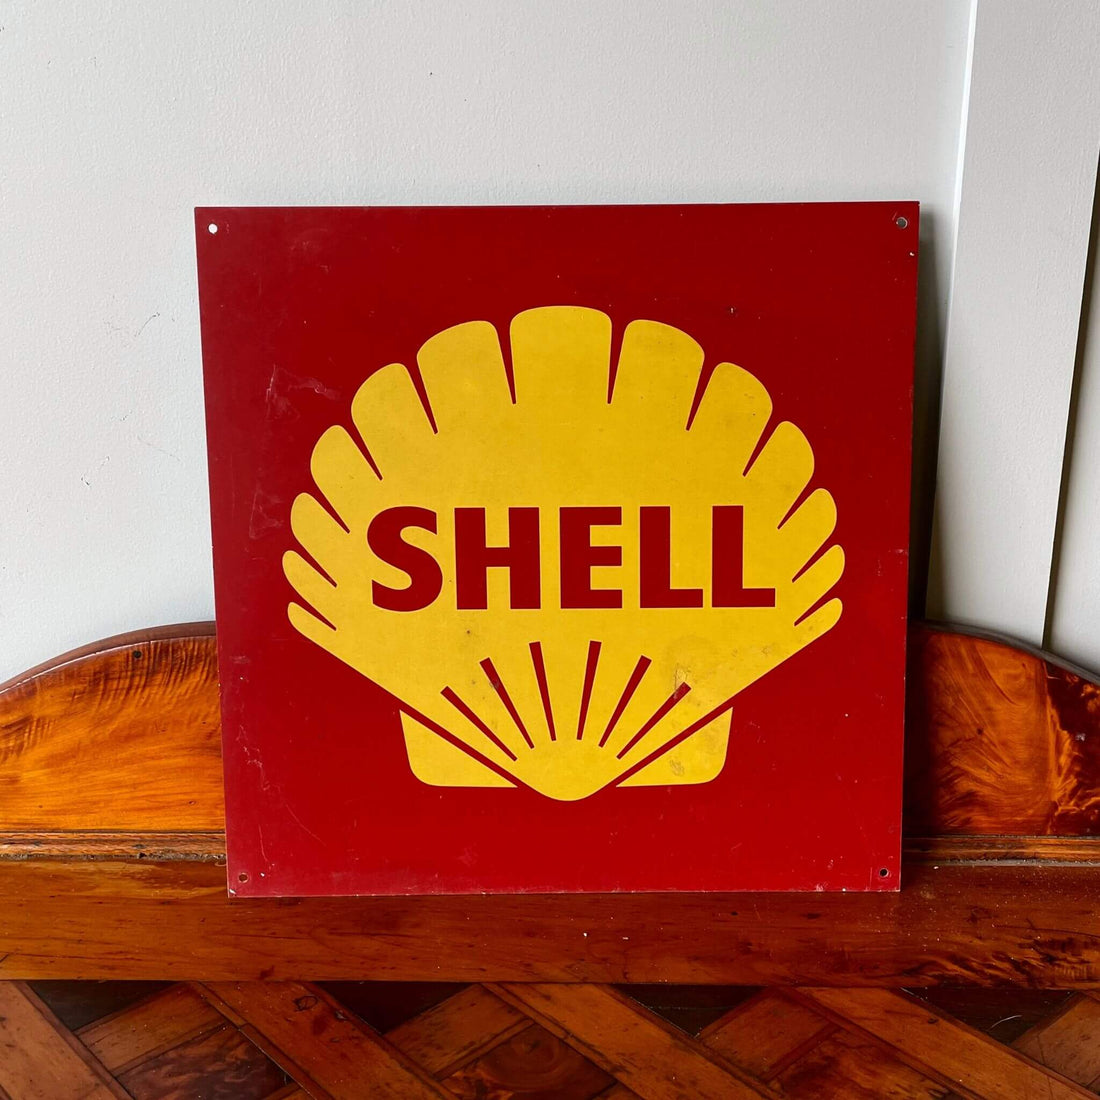 Vintage advertising sign, shell oil co